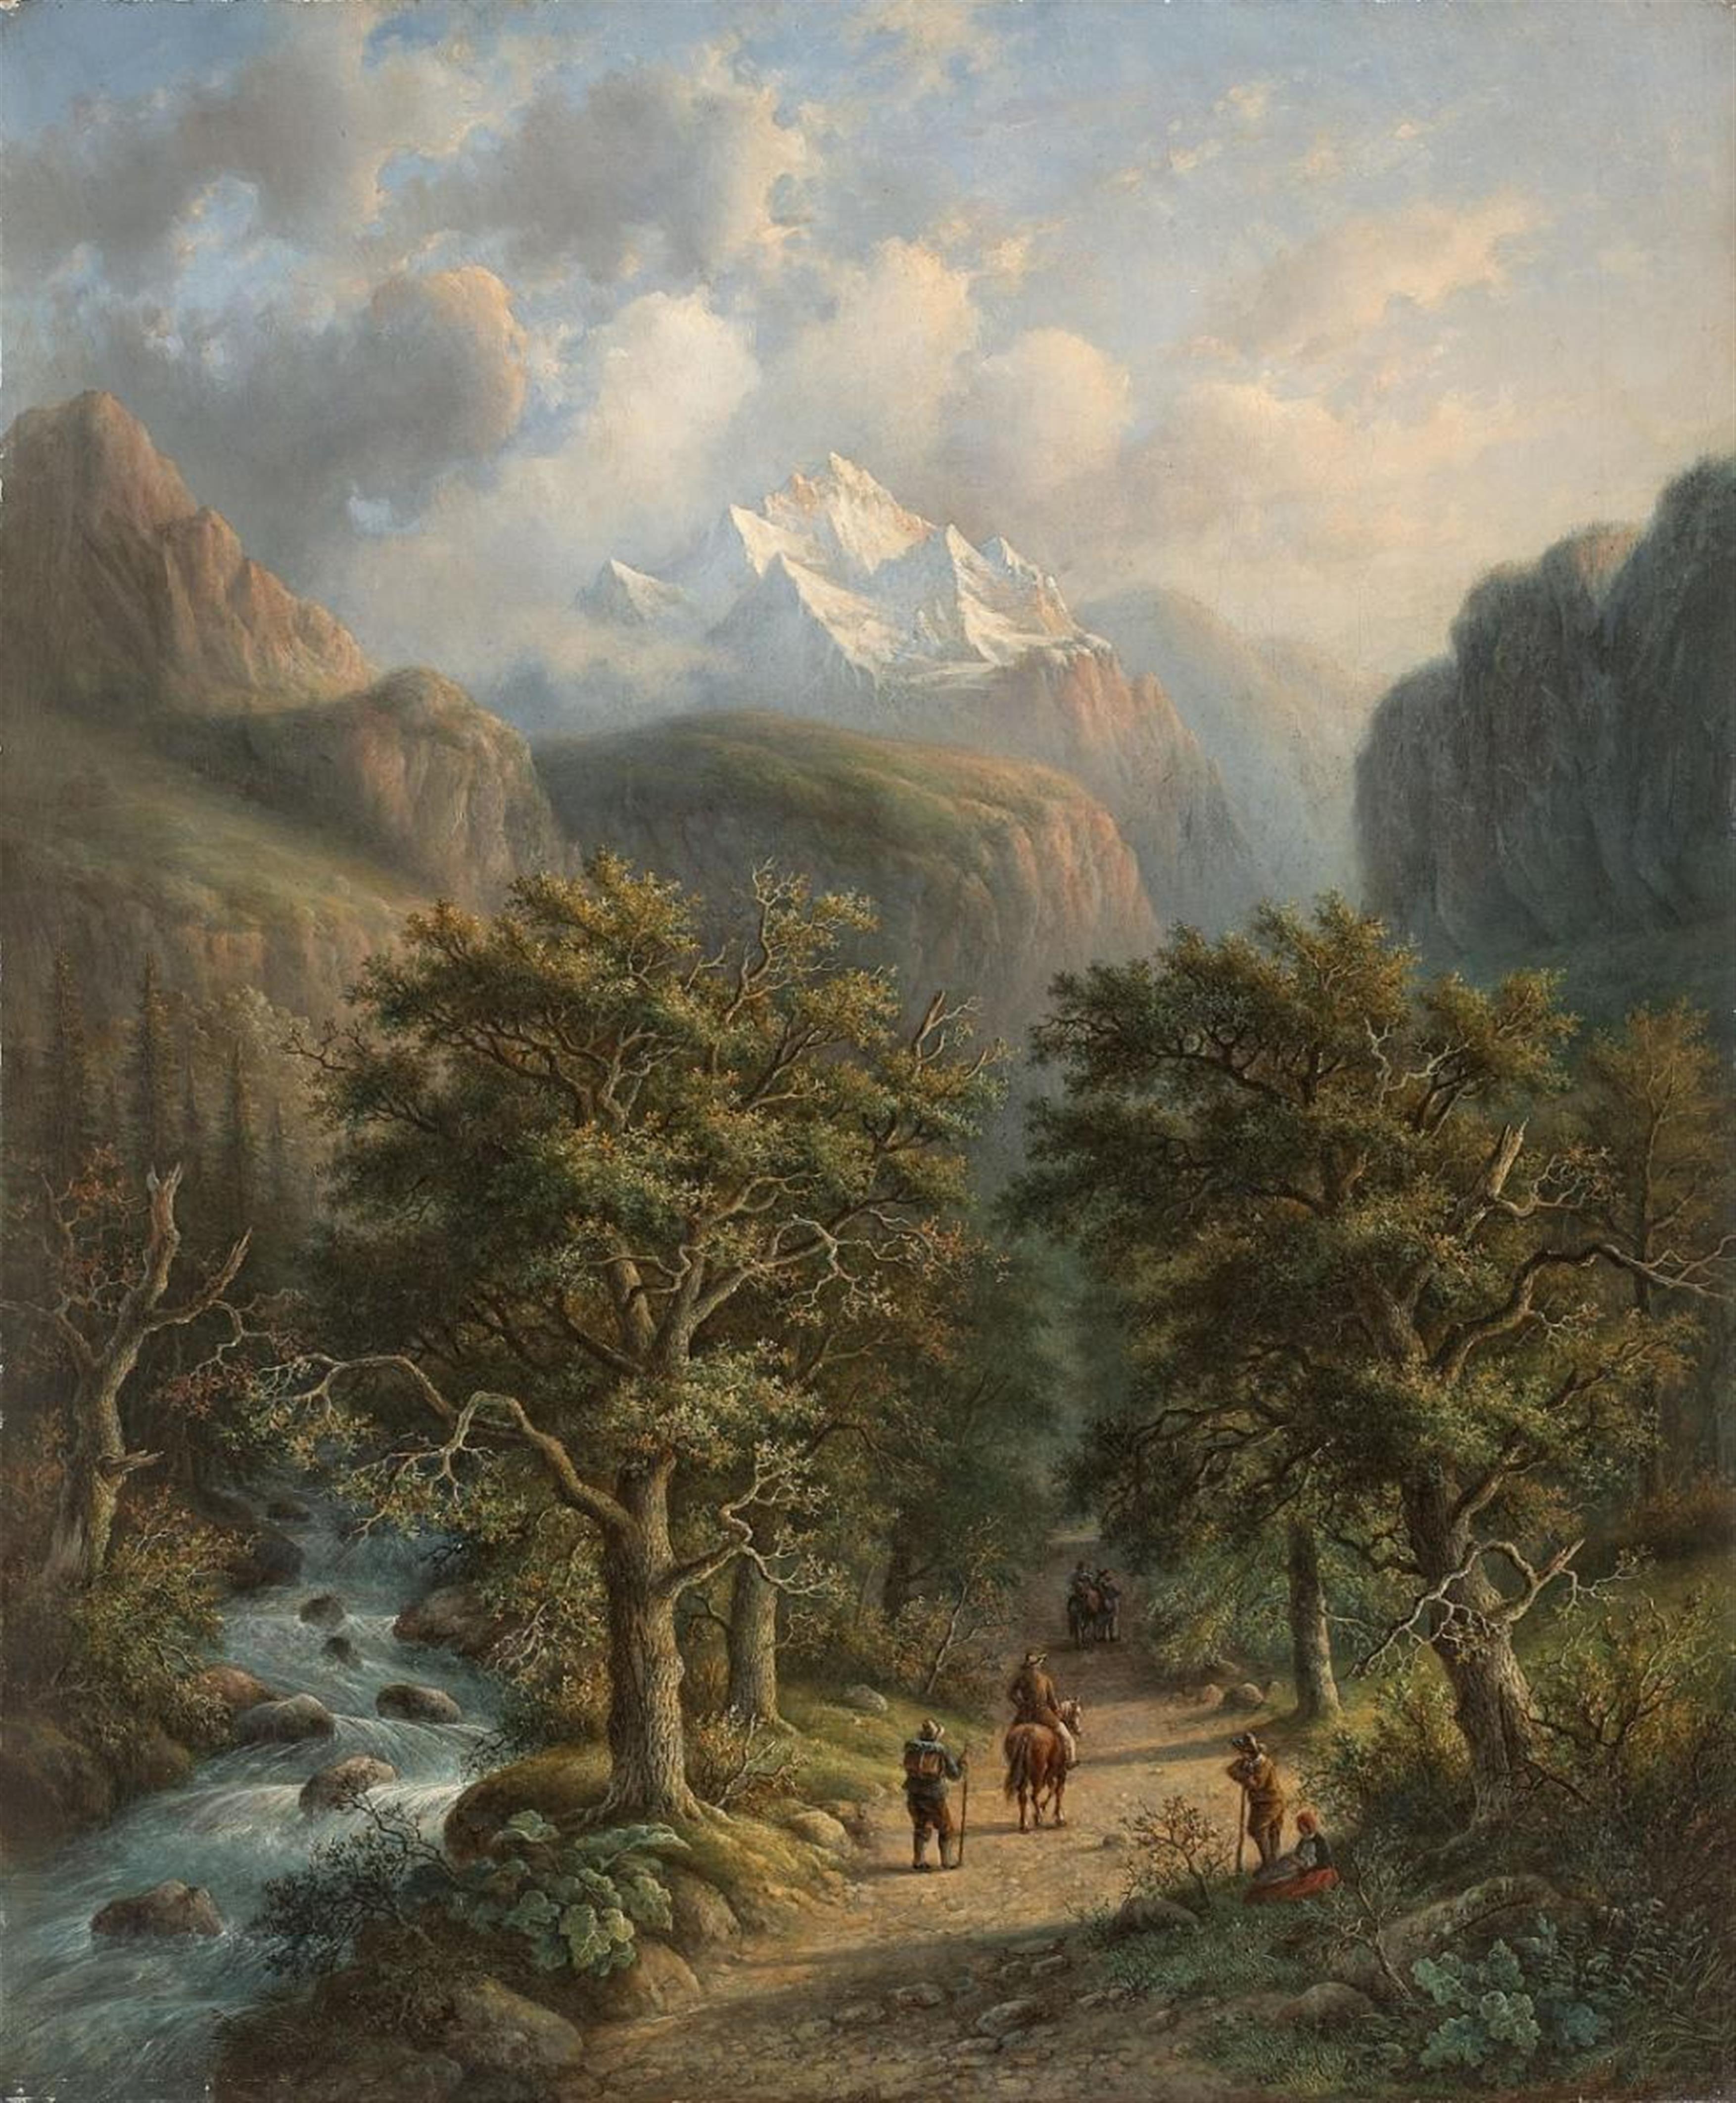 Alexander Joseph Daiwaille - LANDSCAPE IN THE HIGH MOUNTAINS - image-1